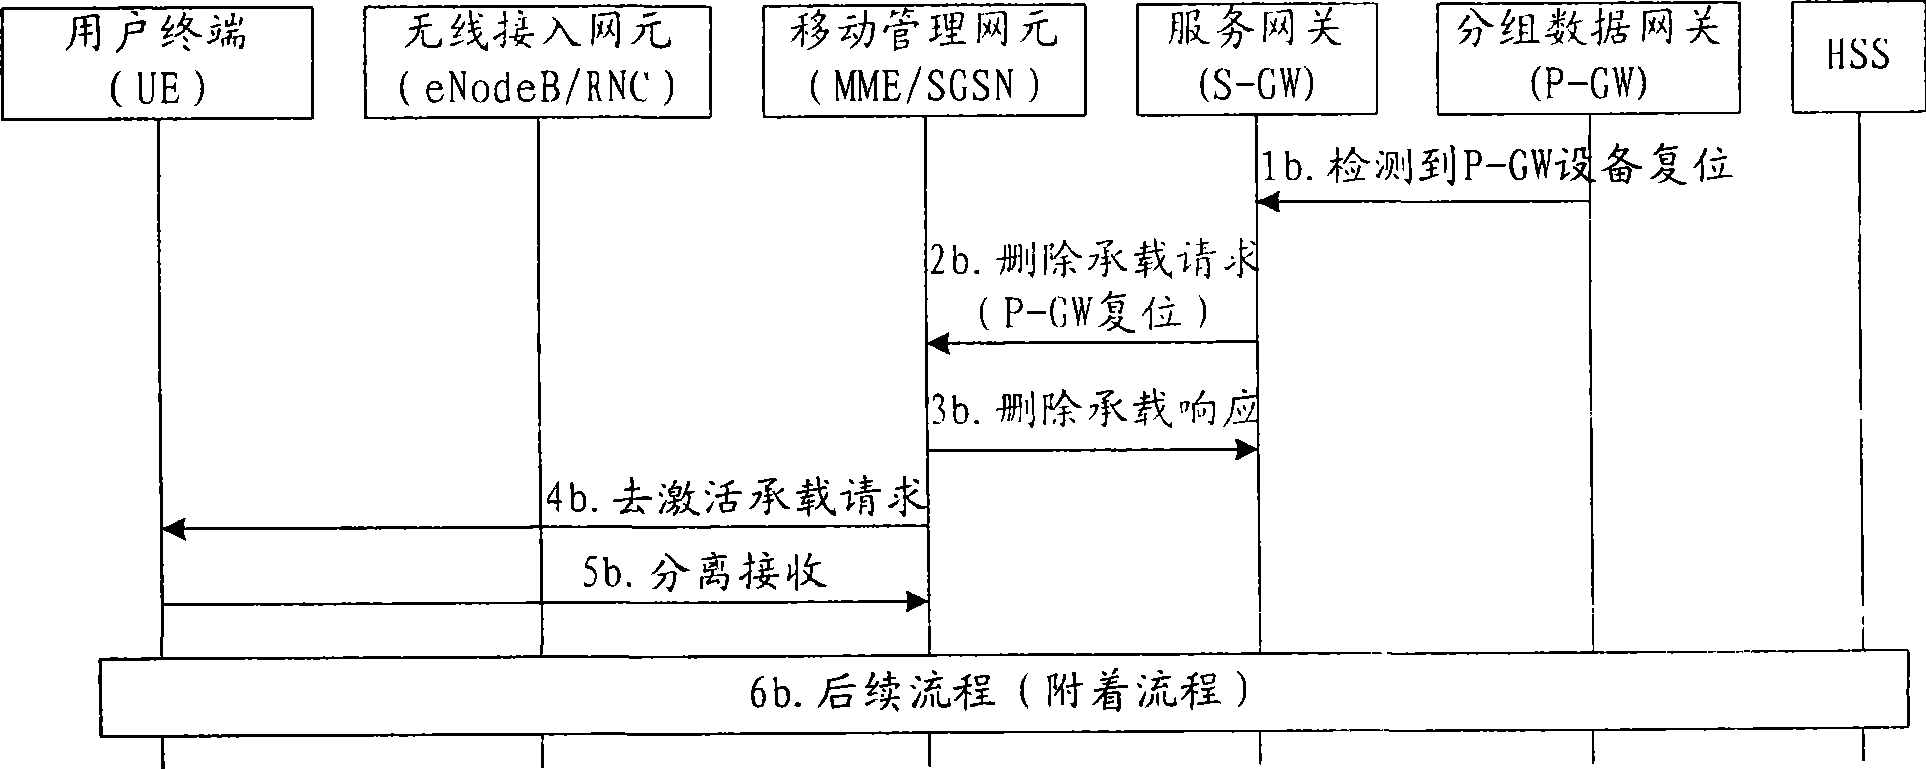 Equipment reset notification method and equipment reset notification system, service and grouped data gateway and mobile management network element